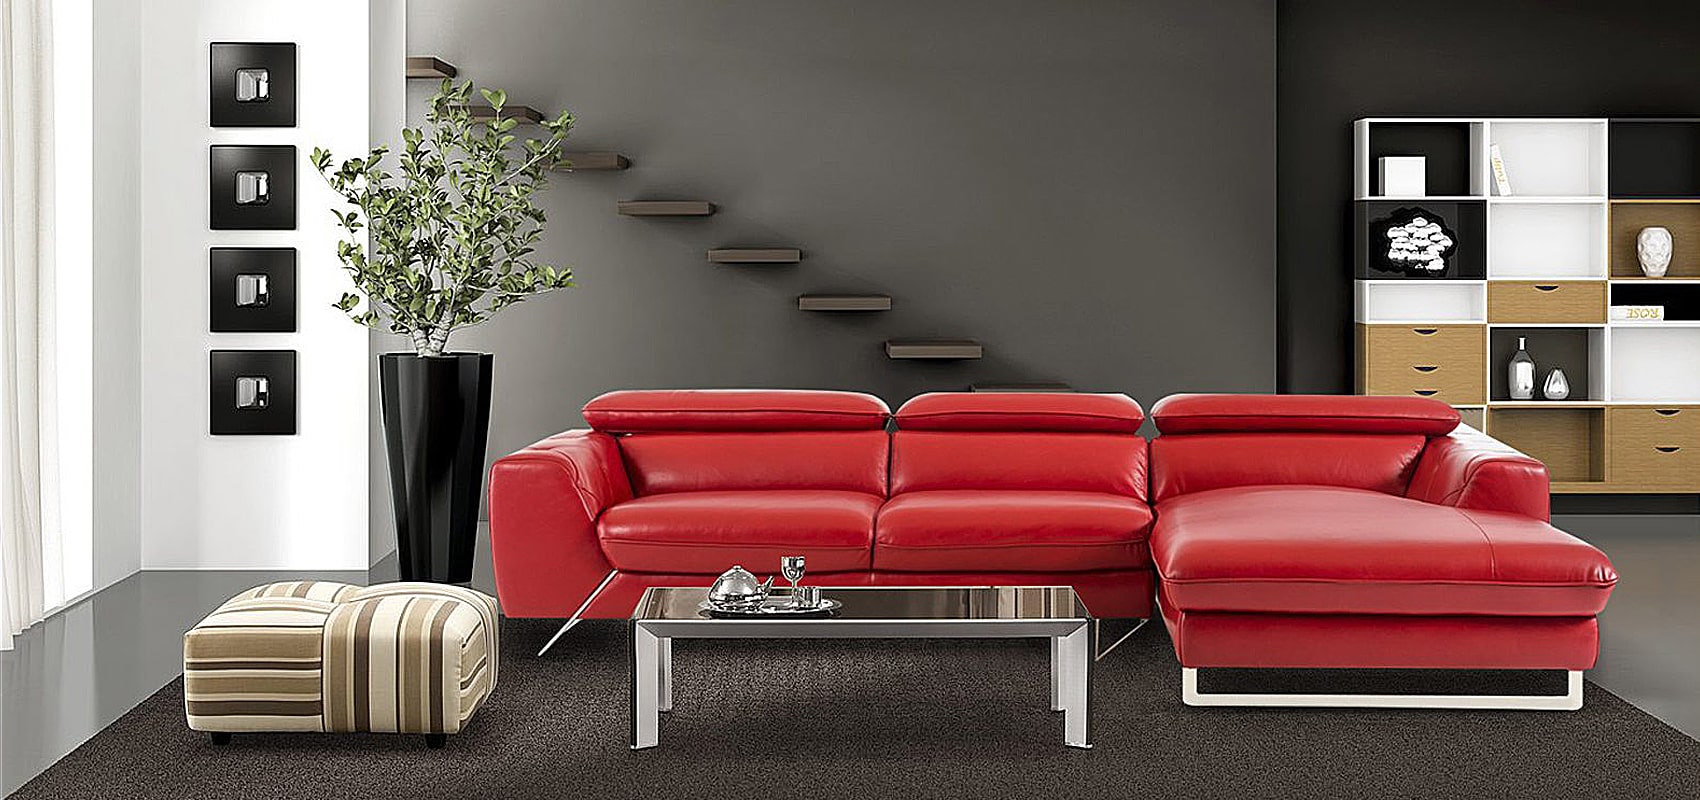 RED SOFA SECTIONAL | RED COUCH SECTIONAL